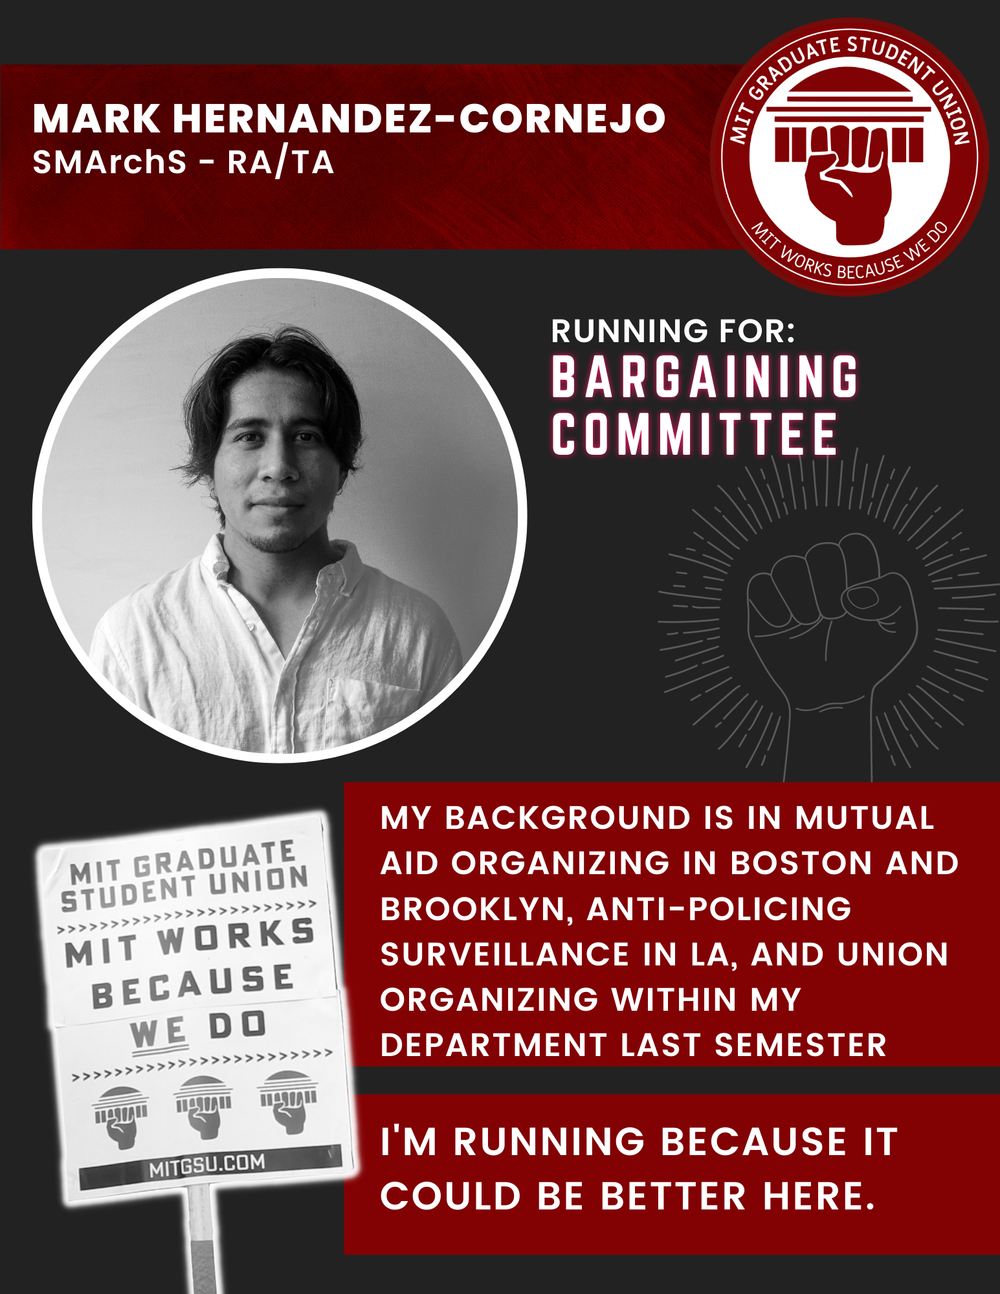  ARK HERNANDEZ-CORNEJO SMArchS - RA/TA   RUNNING FOR: Bargaining Committee  MY BACKGROUND IS IN MUTUAL AID ORGANIZING IN BOSTON AND BROOKLYN, ANTI-POLICING SURVEILLANCE IN LA, AND UNION ORGANIZING WITHIN MY DEPARTMENT LAST SEMESTER   I'M RUNNING BECA